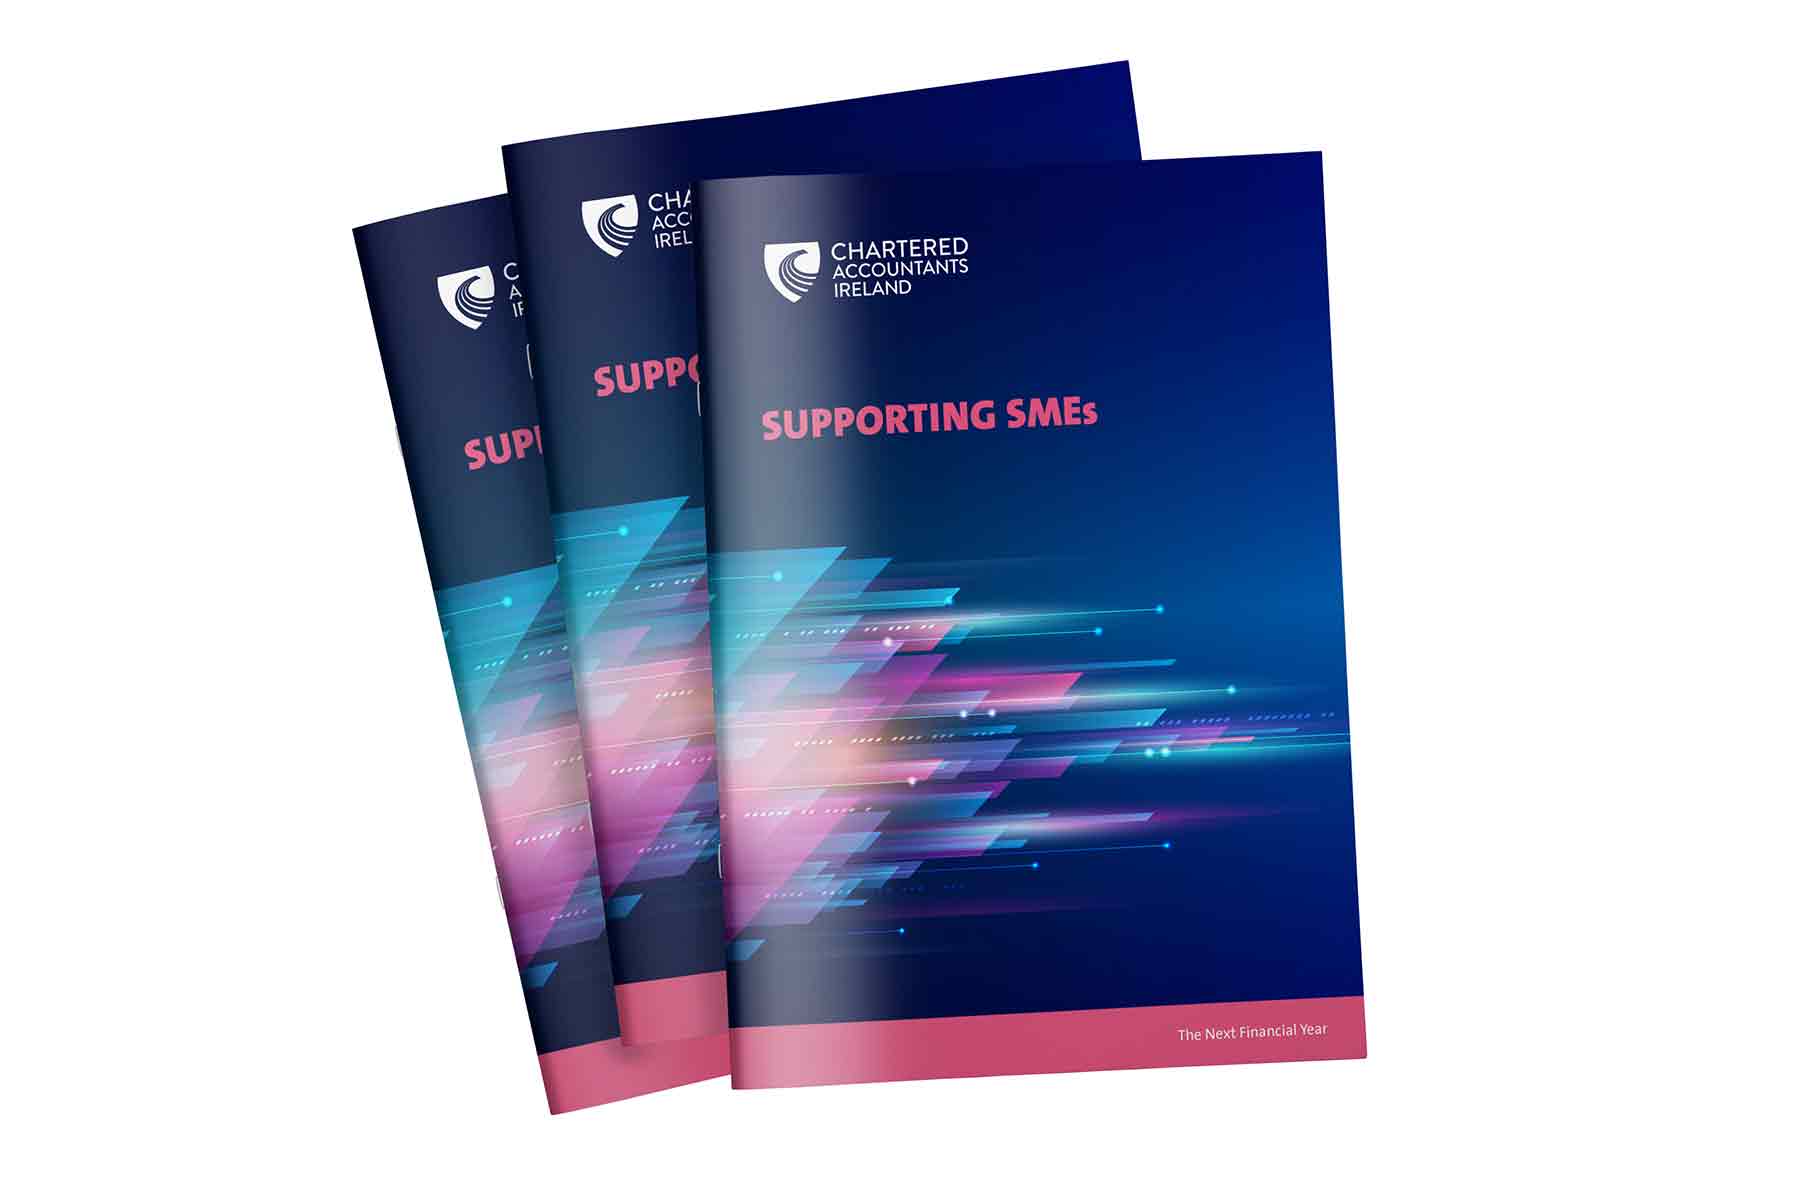 The front cover of The Next Financial Year: Supporting SMEs